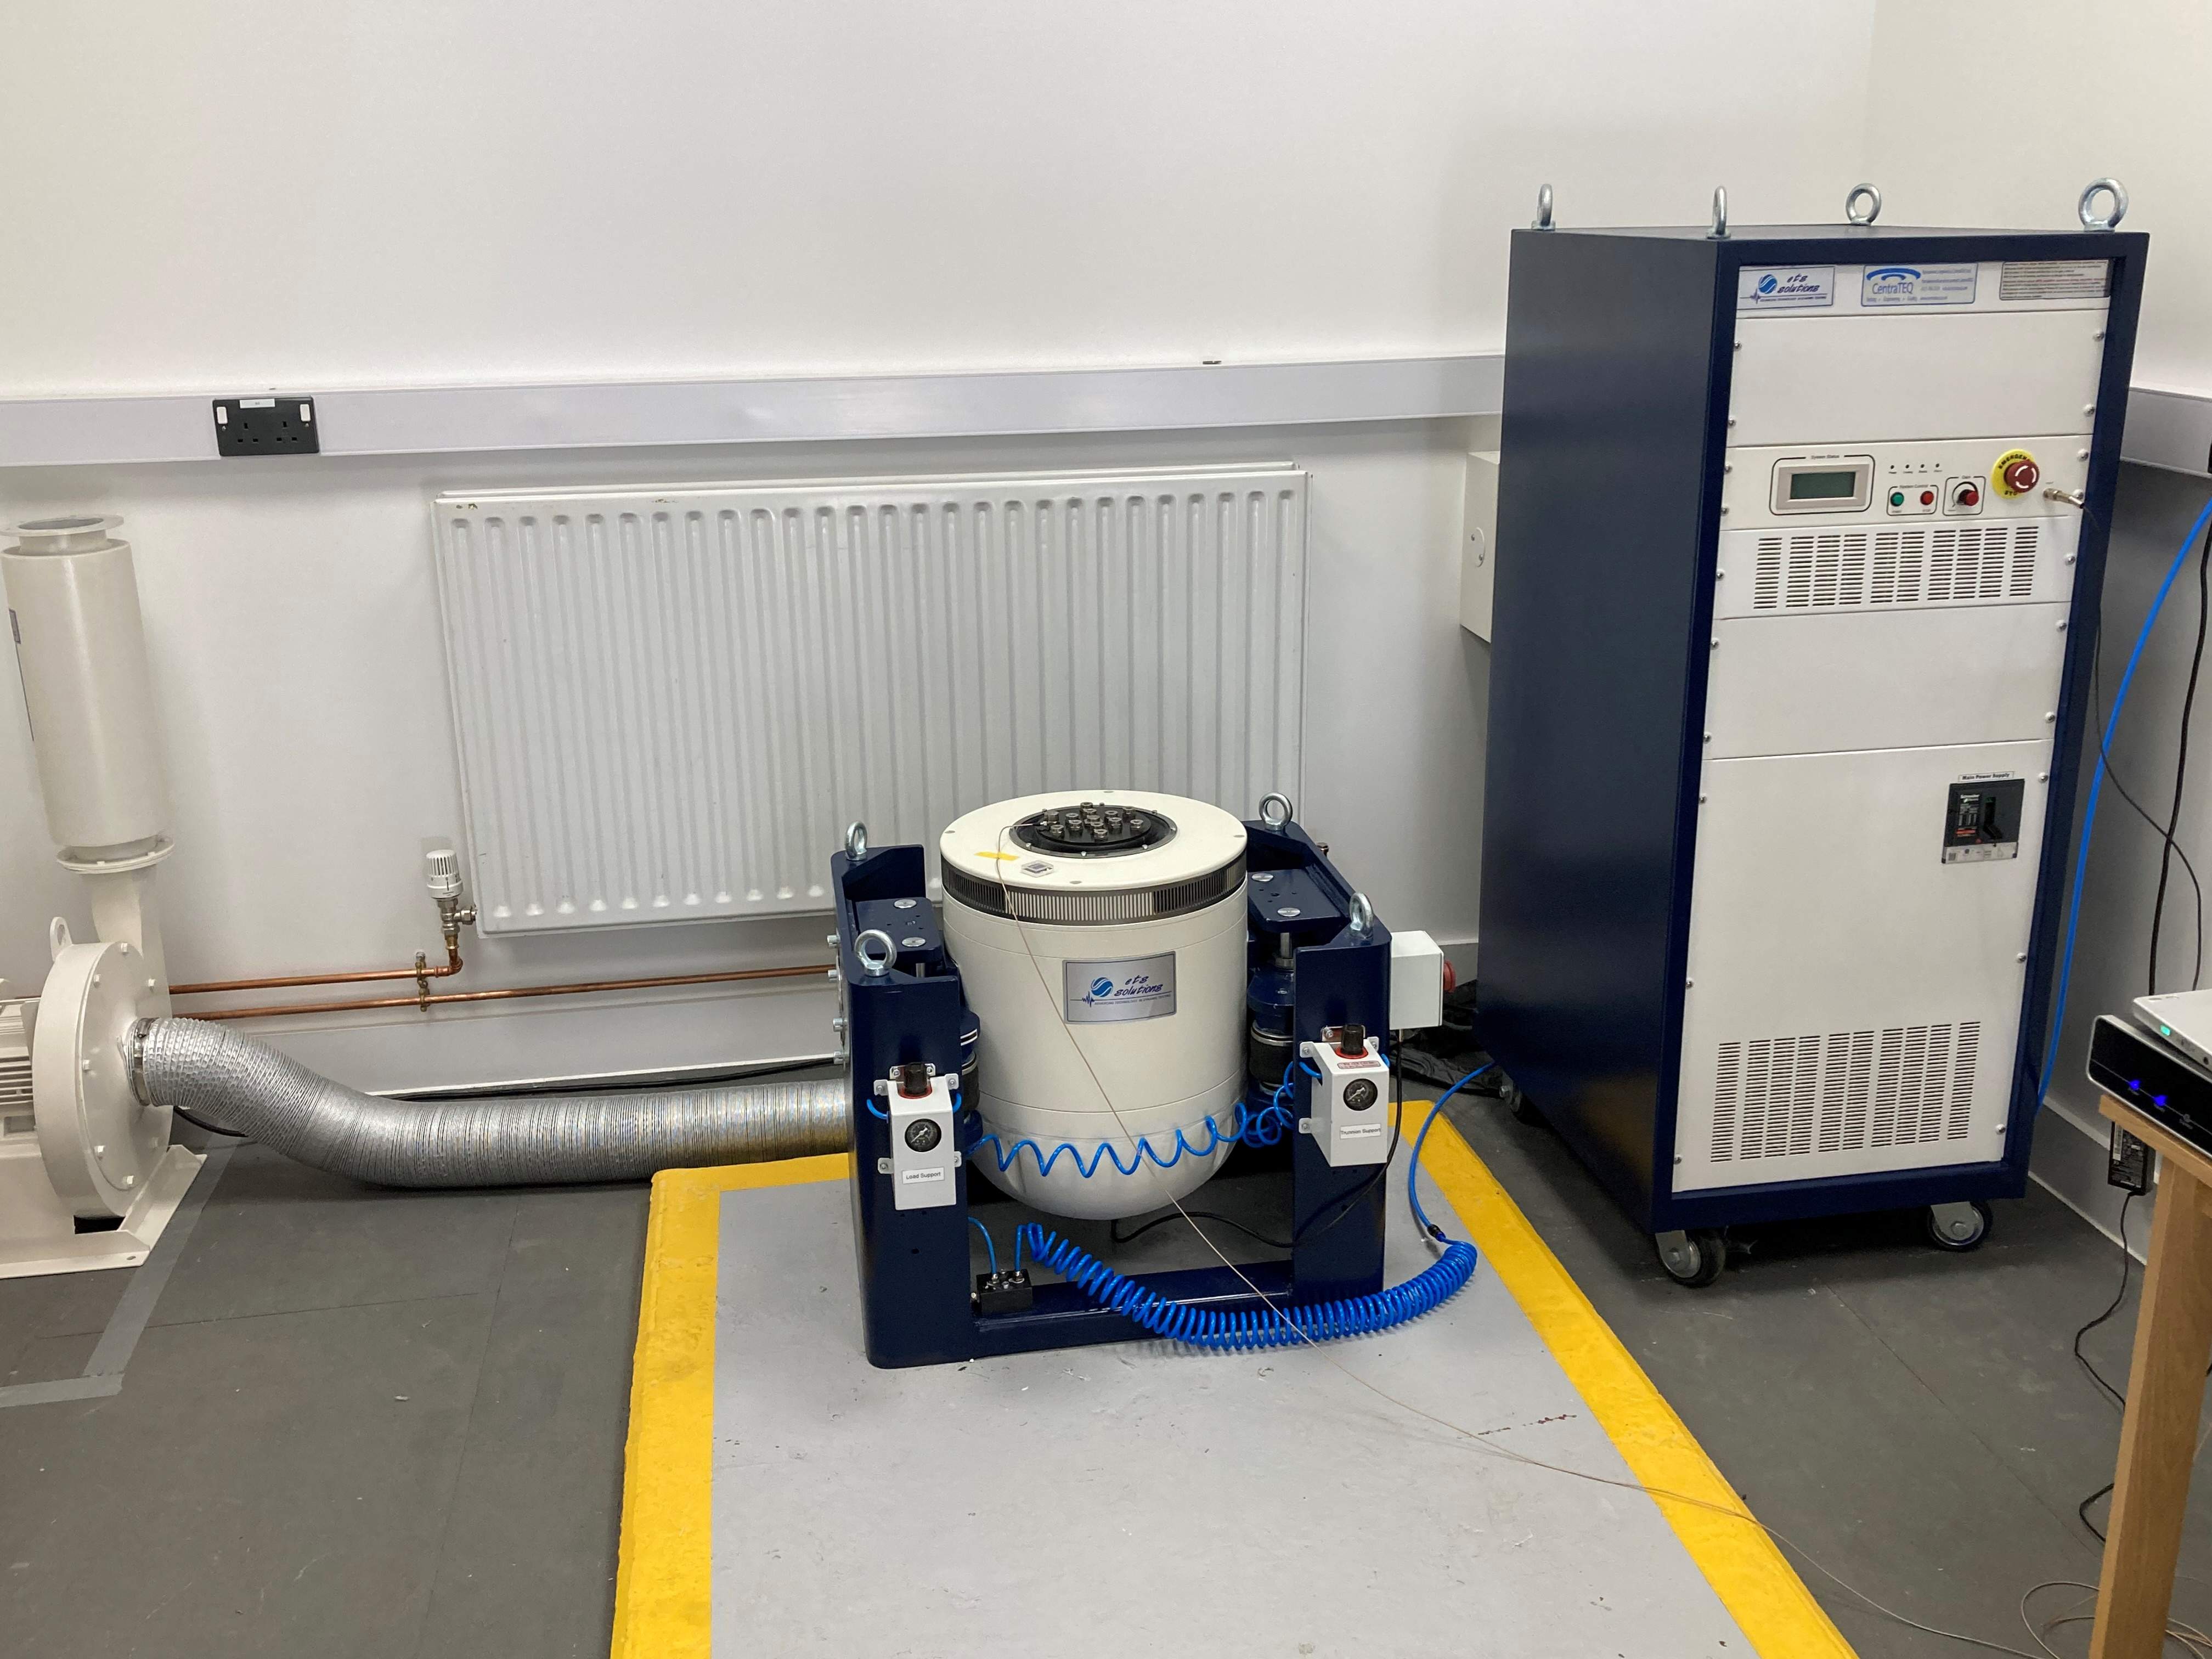 Exeter University Employs ETS Vibration Test Solution In Its Research To Improve The Energy Efficiency Of Engineering Systems